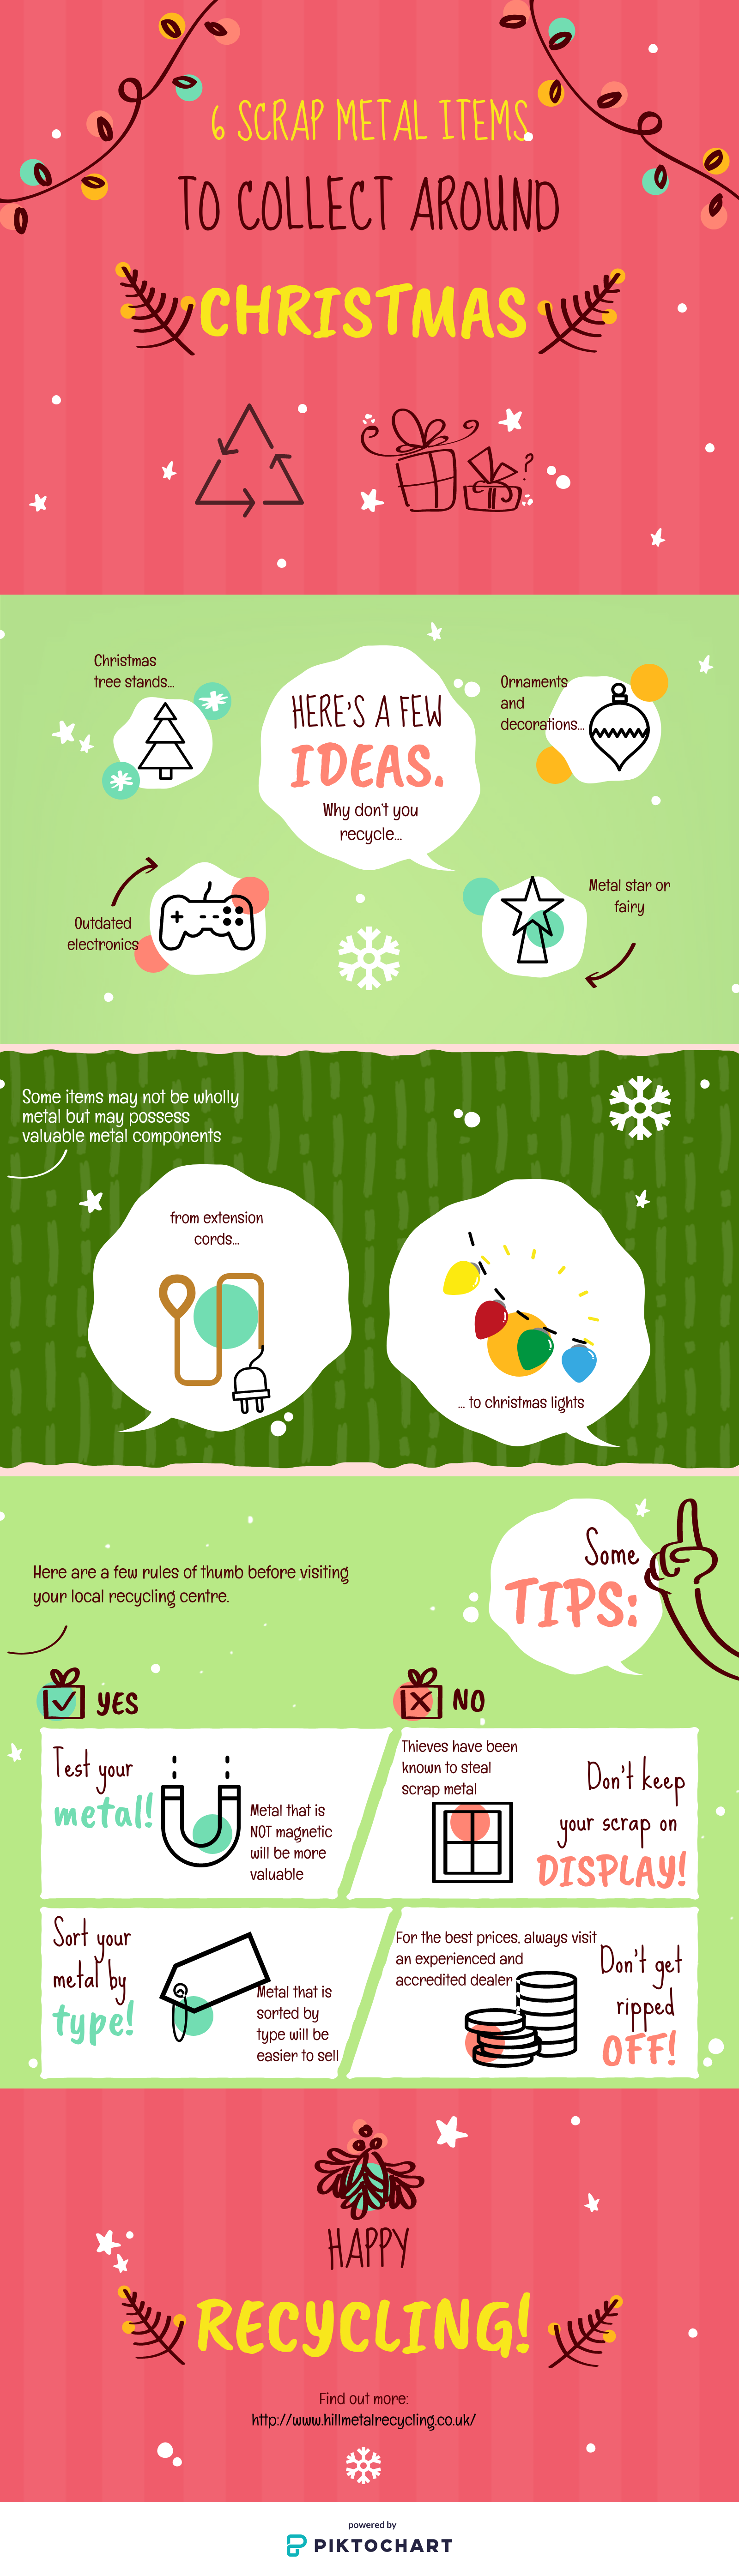 Christmas scrap metal recycling infographic